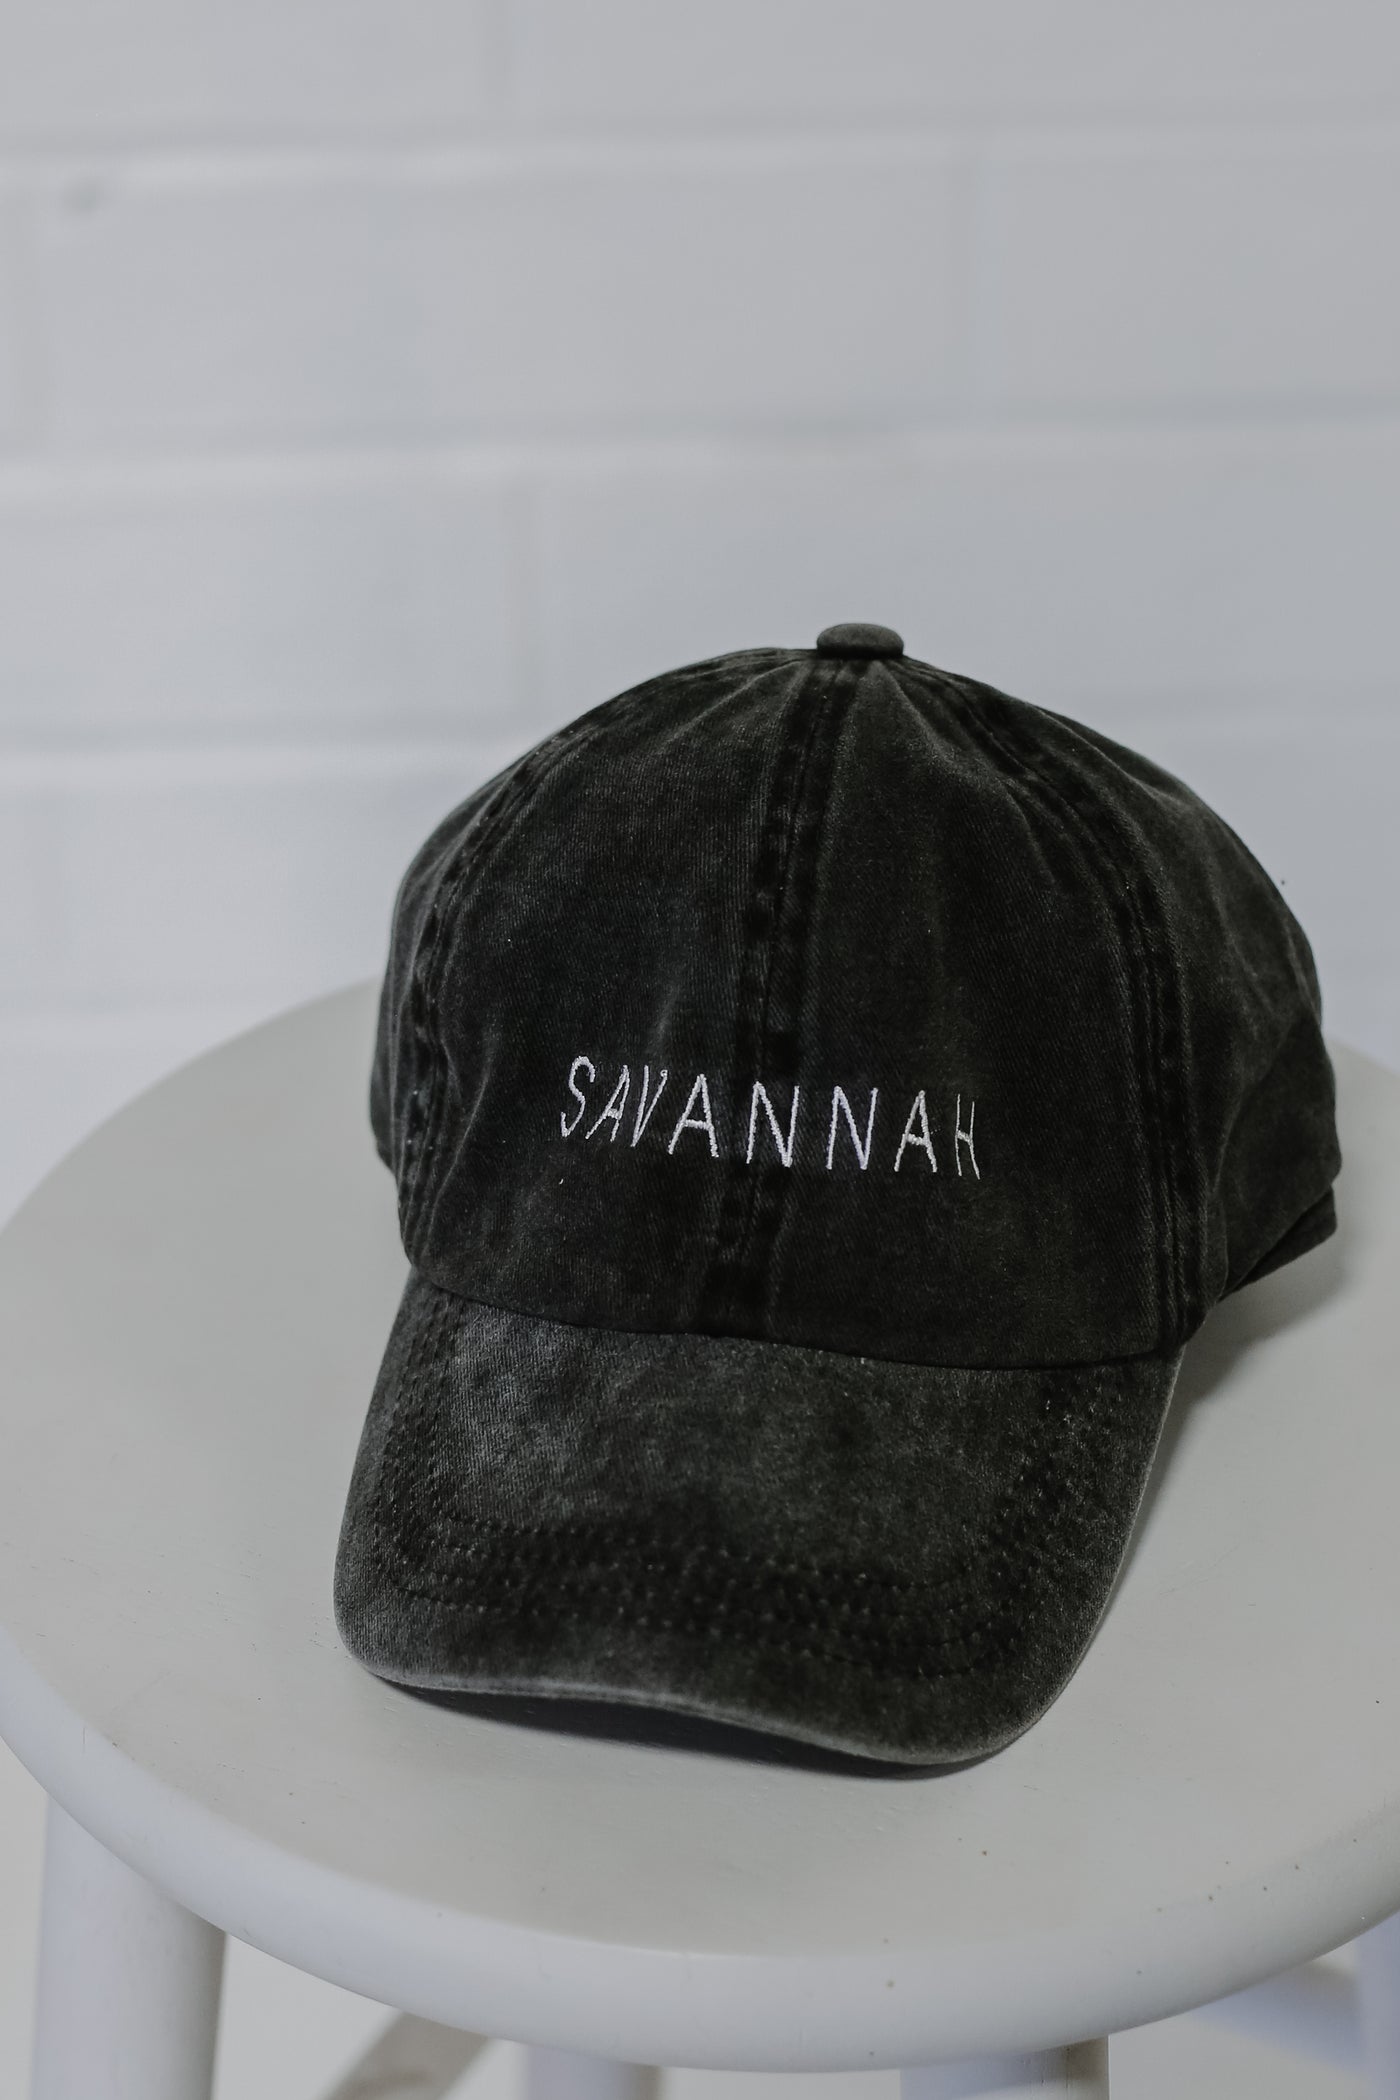 Savannah Embroidered Hat in black flat lay